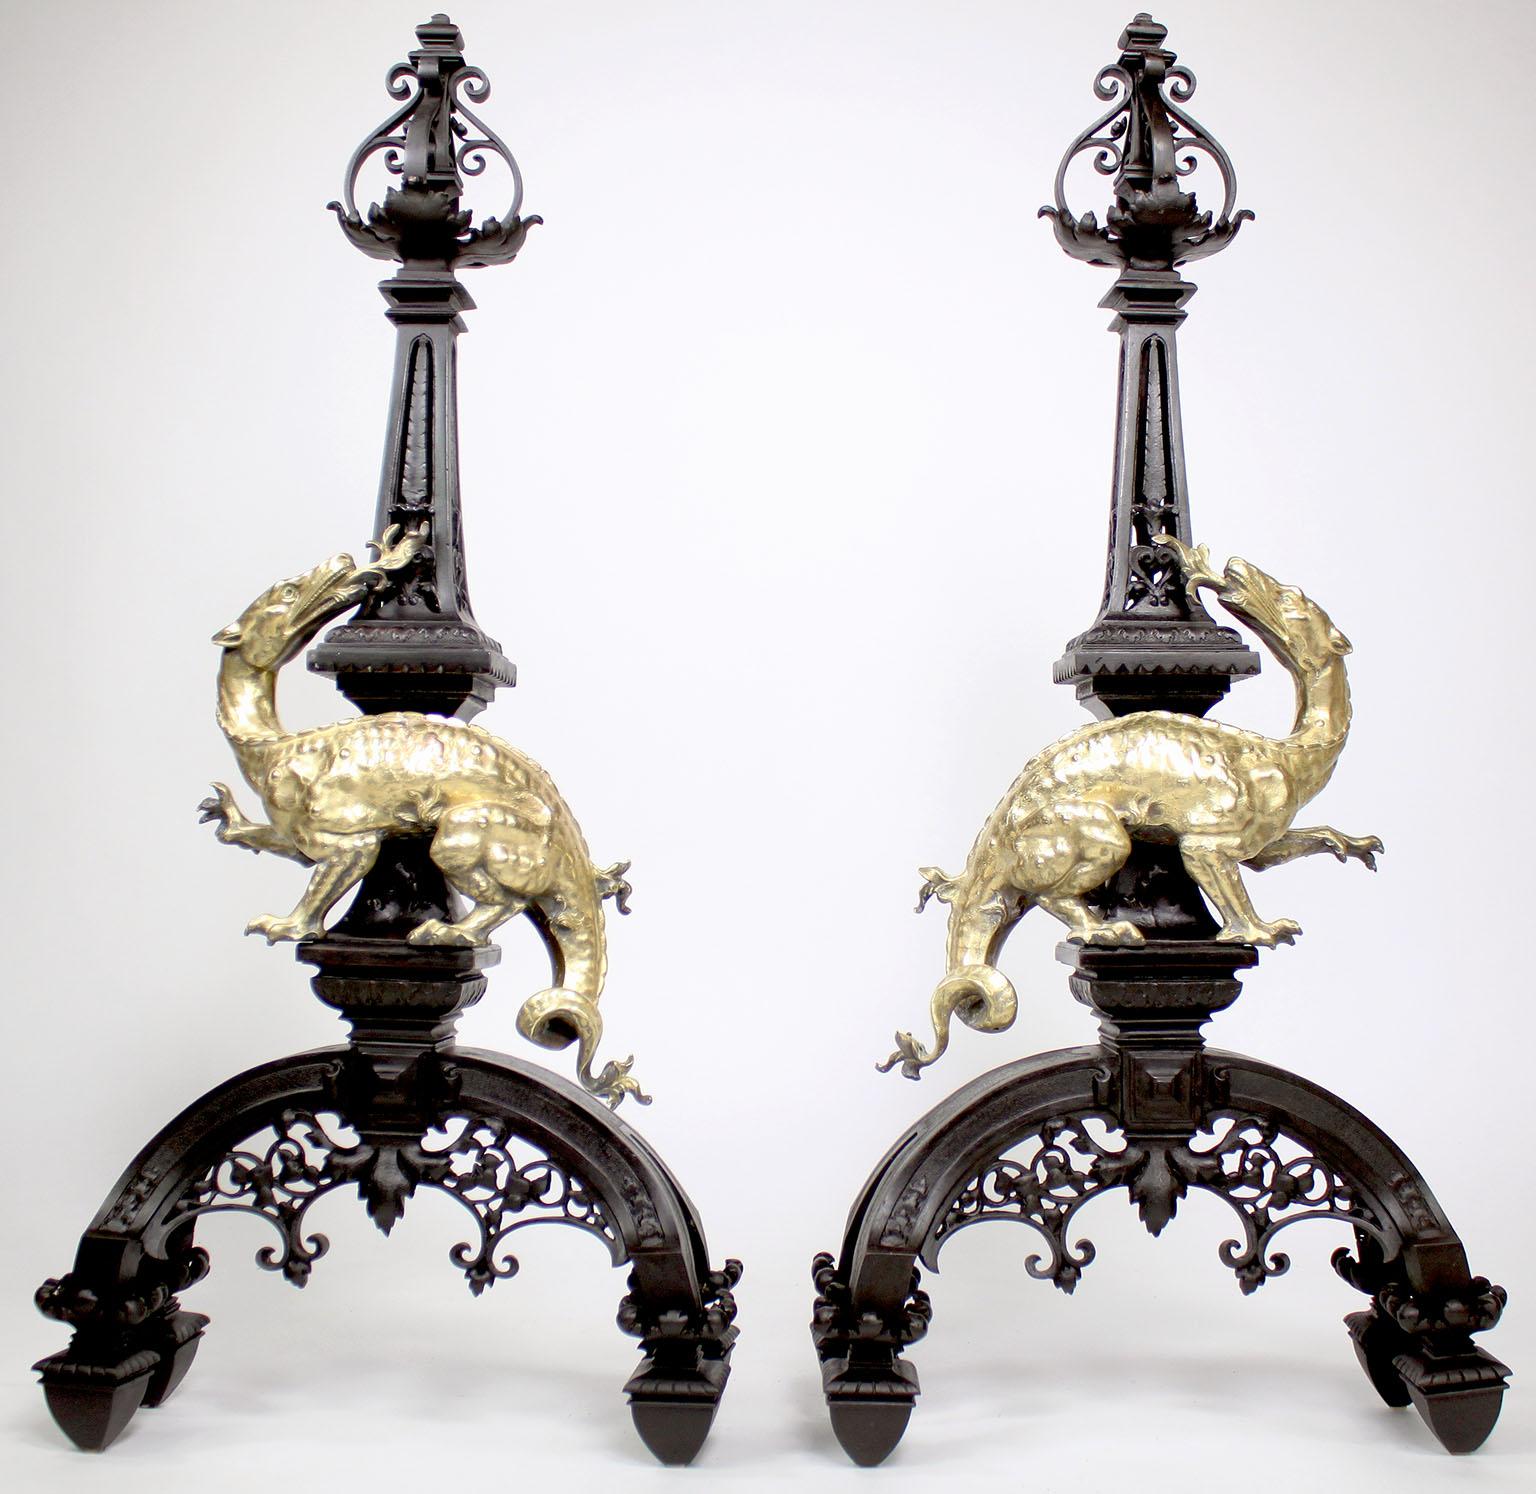 A Group of Six Franco/Dutch 19th/20th Century Japonisme Style Gilt and Ebonized Bronze and Gilt-Bronze Figural Chenets (Andirons), Gilt-Bronze Figural Fire-Tools and Metal Fire-Screen. The tall orientalist flavor chenets, each surmounted with a